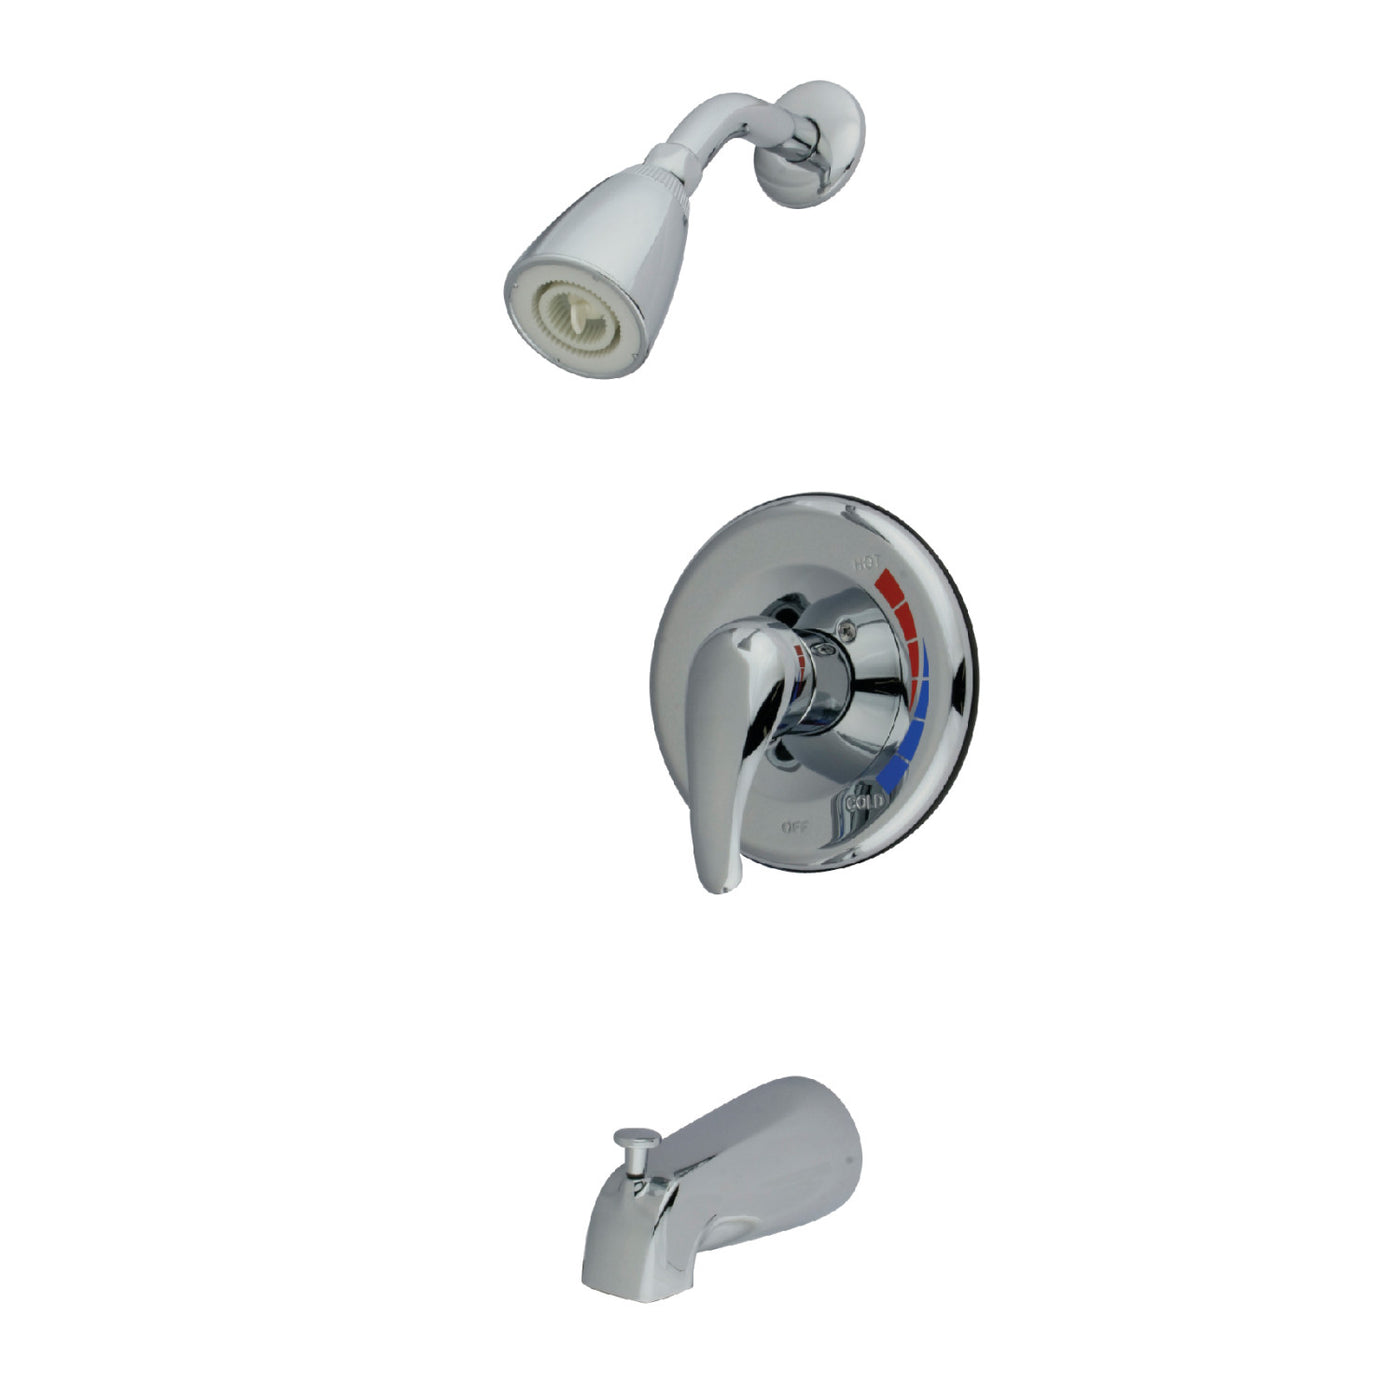 Elements of Design EB651 Single Lever Handle Tub and Shower Faucet, Polished Chrome